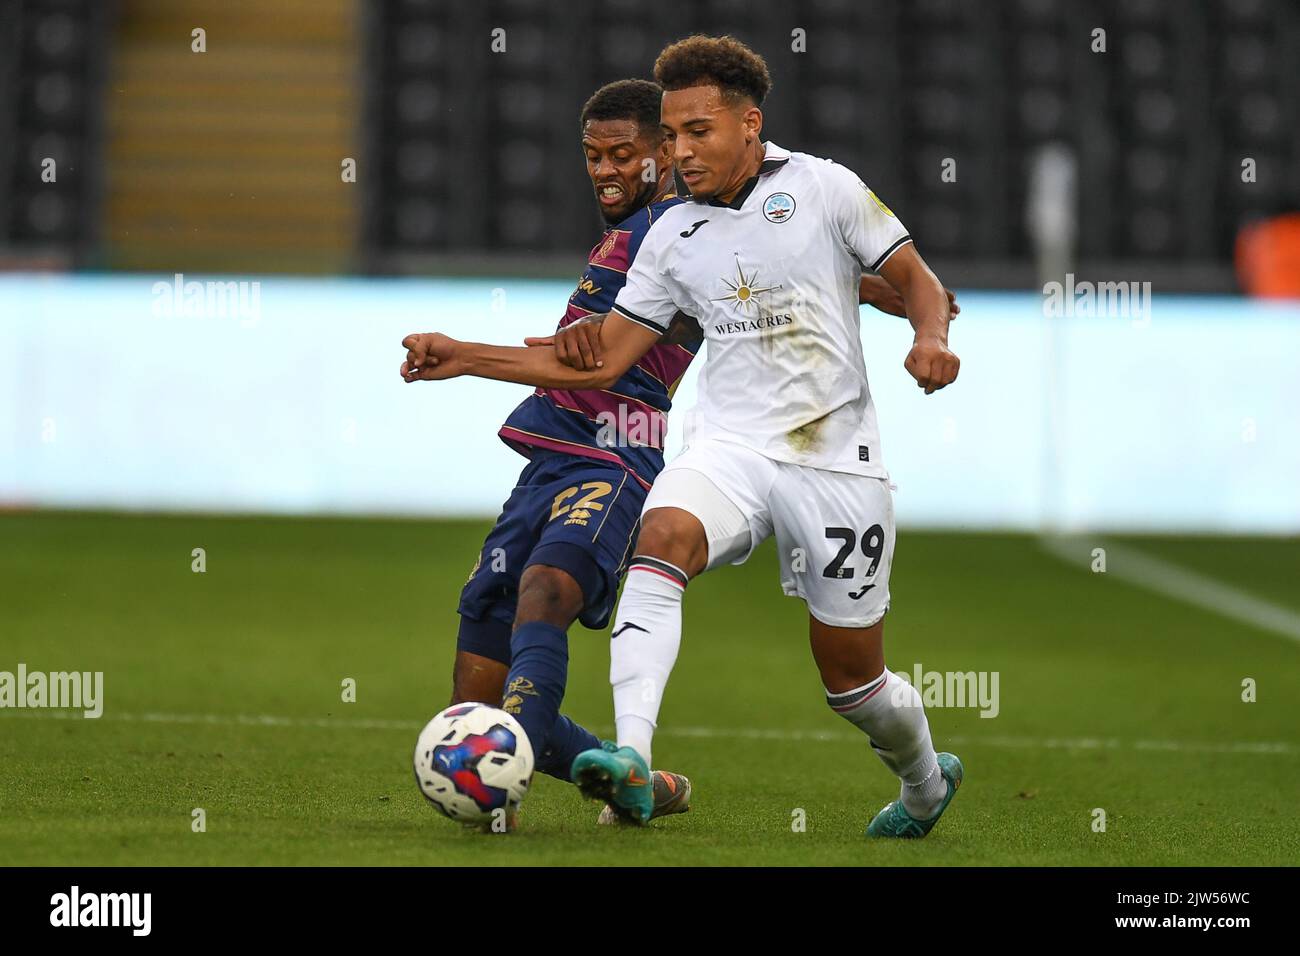 Swansea, UK. 03rd Sep, 2022. Matthew Sorinola #29 of Swansea City Kenneth Paal #22 of QPR during the Sky Bet Championship match Swansea City vs Queens Park Rangers at Swansea.com Stadium, Swansea, United Kingdom, 3rd September 2022 (Photo by Mike Jones/News Images) in Swansea, United Kingdom on 9/3/2022. (Photo by Mike Jones/News Images/Sipa USA) Credit: Sipa USA/Alamy Live News Stock Photo